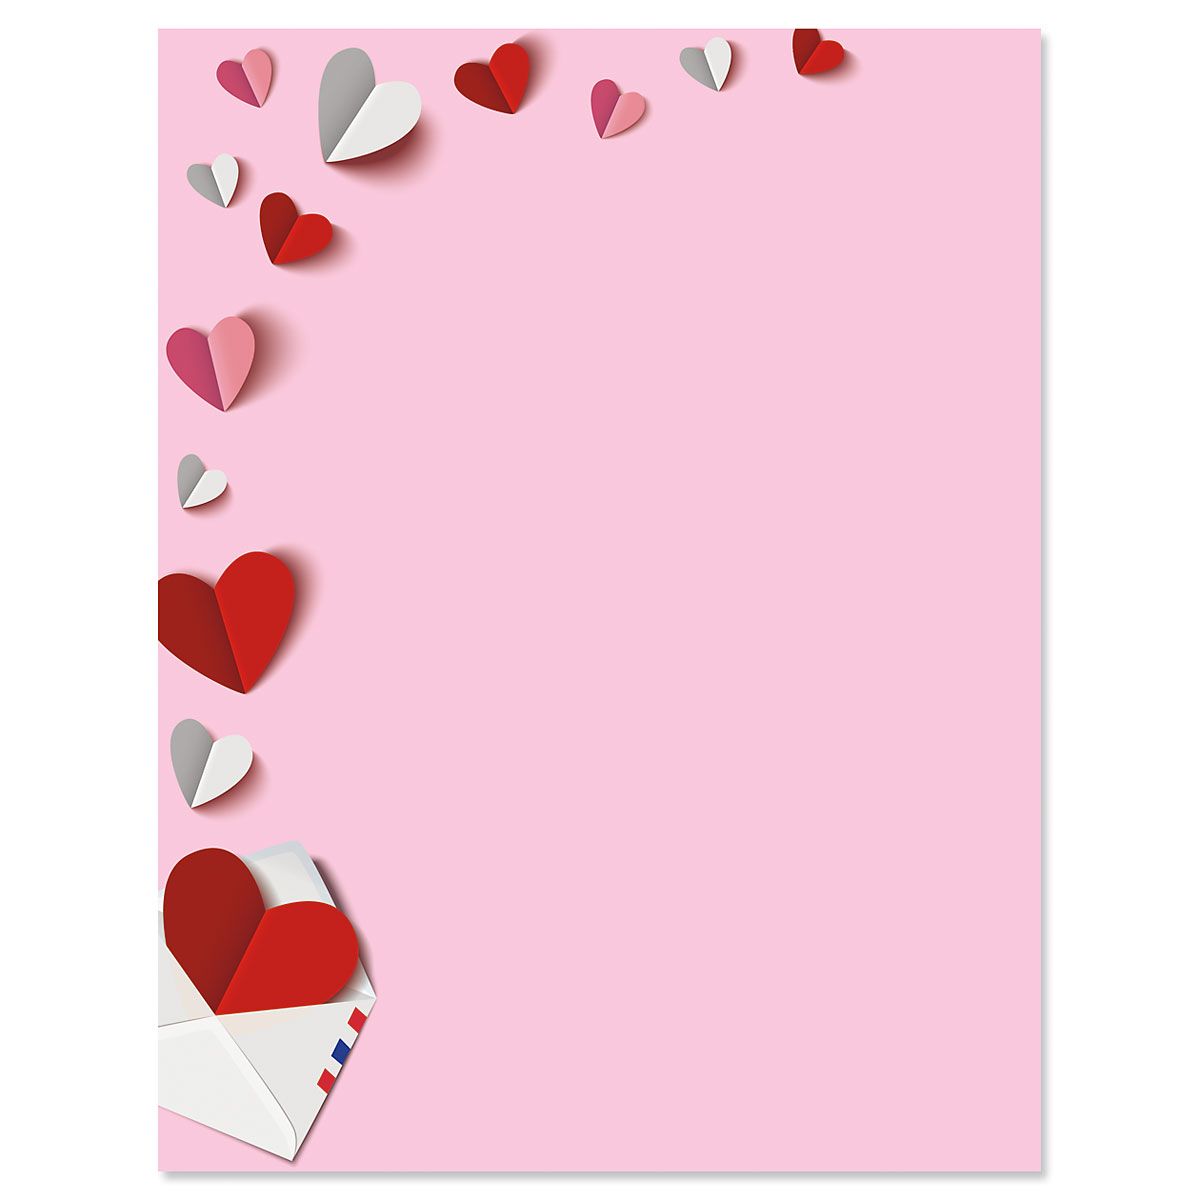 Paper Hearts Valentine's Day Letter Papers Colorful Images